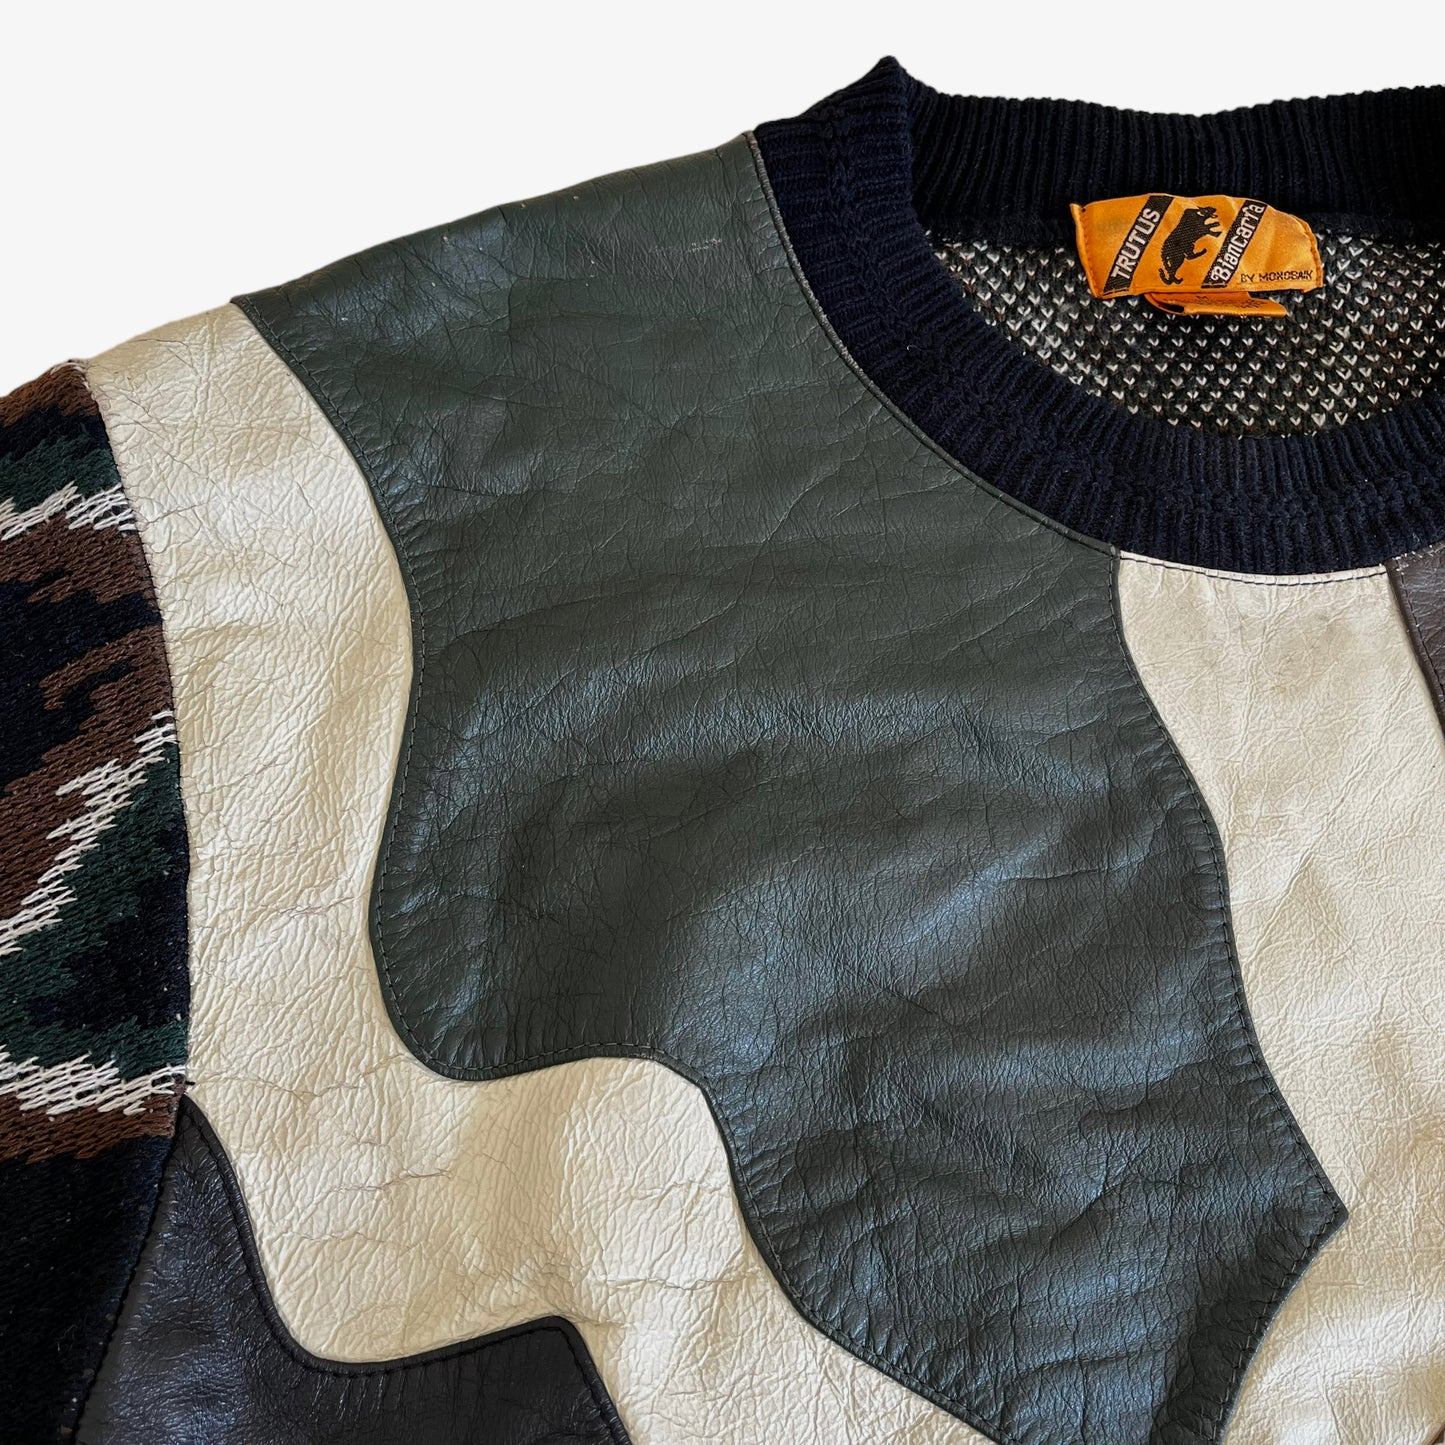 Vintage 90s Trutus Biancarra By Monobaik Leather Patch Knitted Jumper Shoulder - Casspios Dream